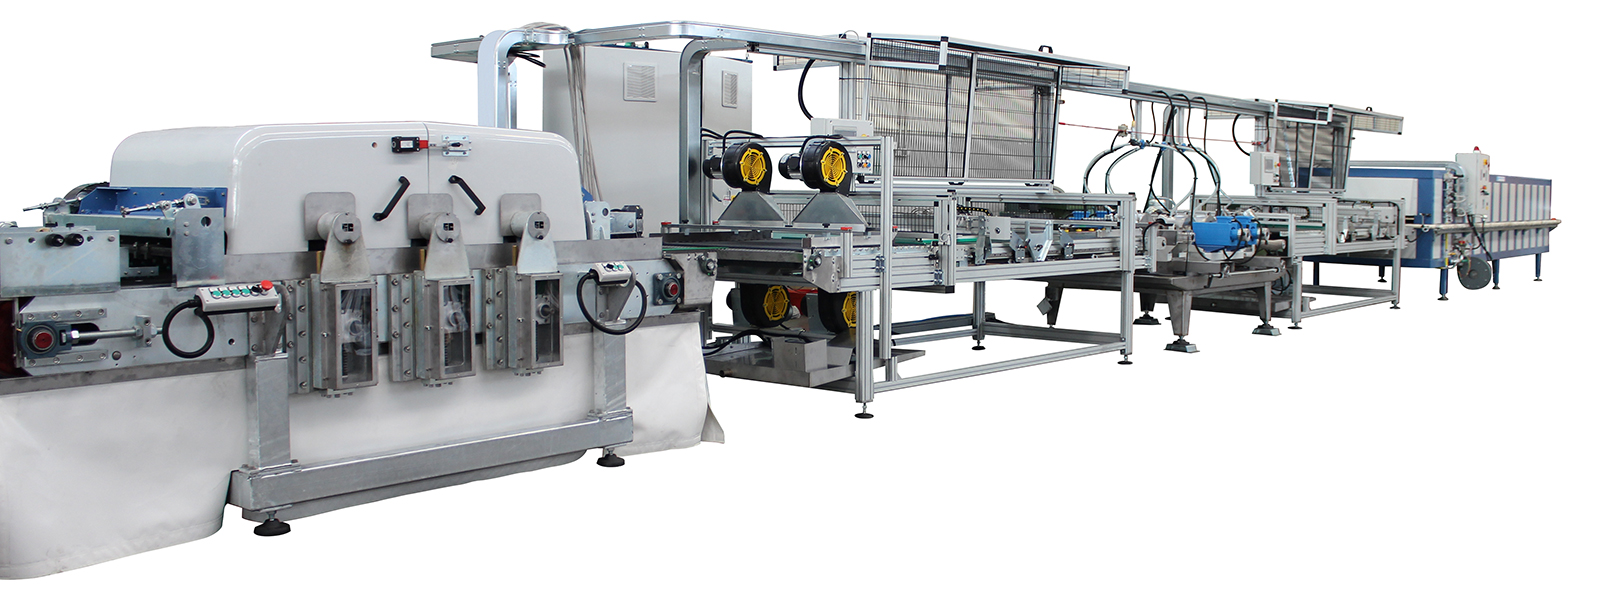 MTP MRC - AUTOMATIC LINE FOR CUTTING AND RECTIFYING